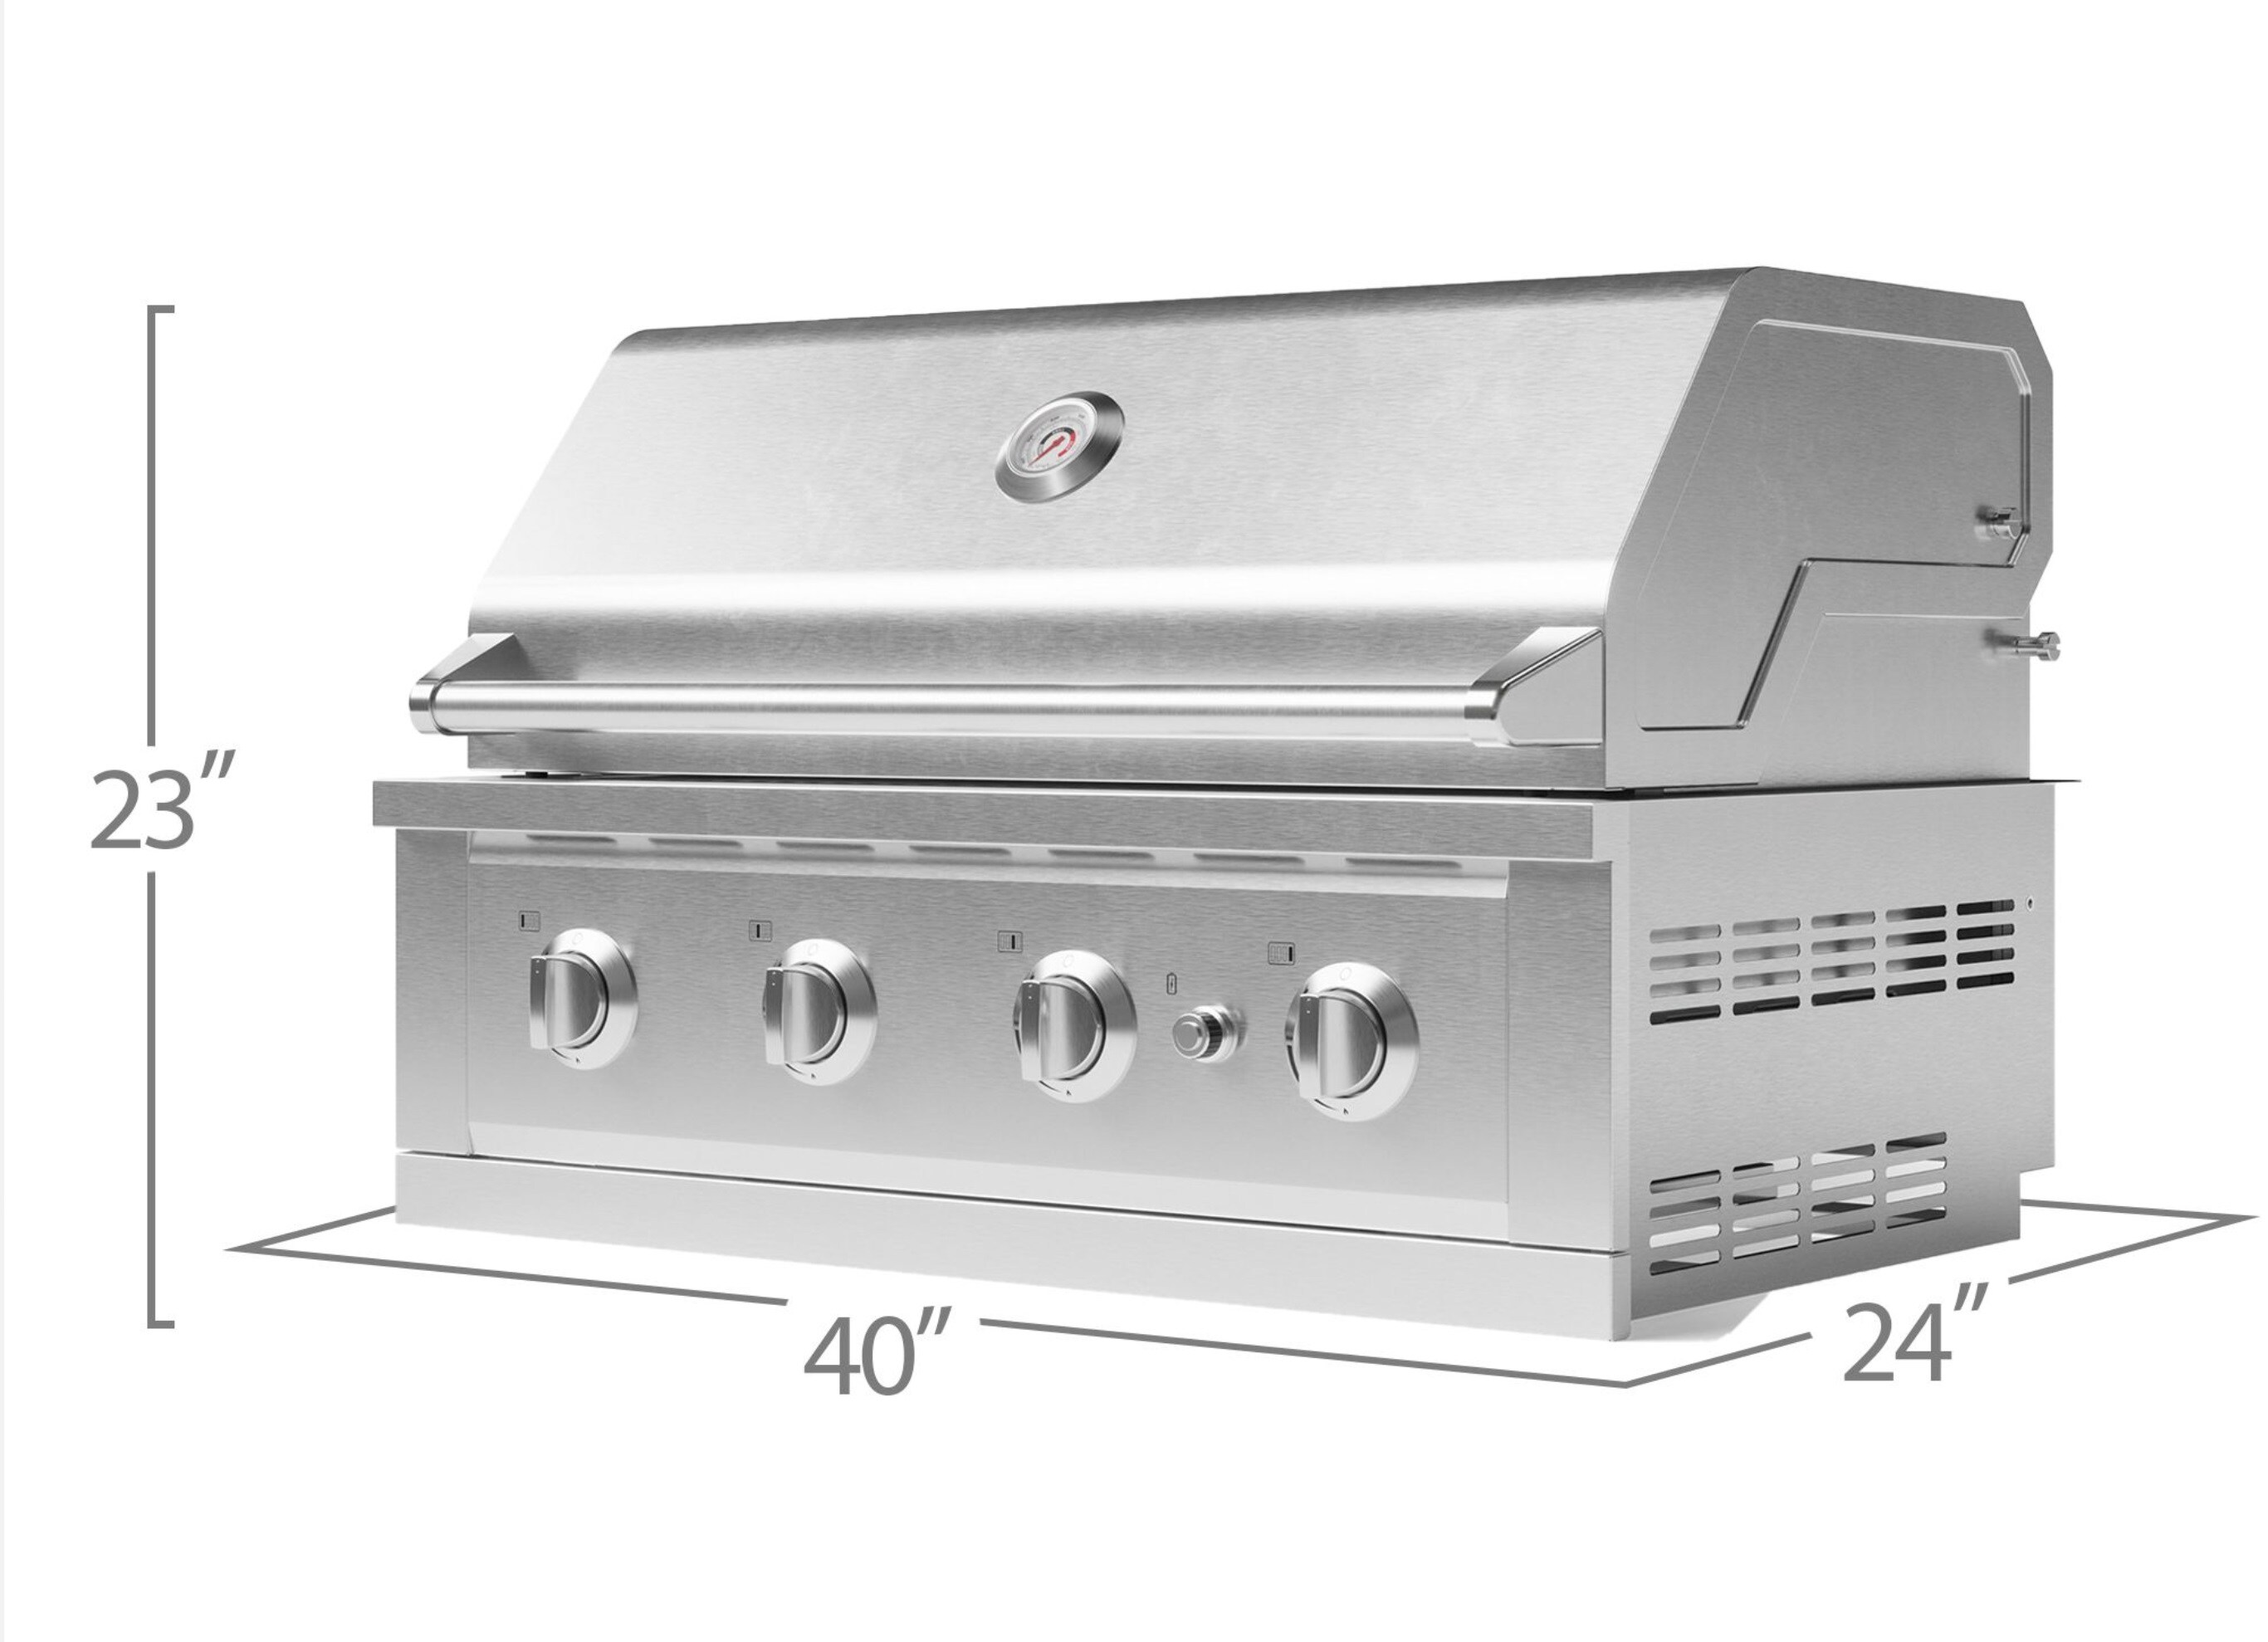 In Commercial 24-Hot Dog Indoor Grill 290 Sq Rotisserie-Style Stainless Steel 